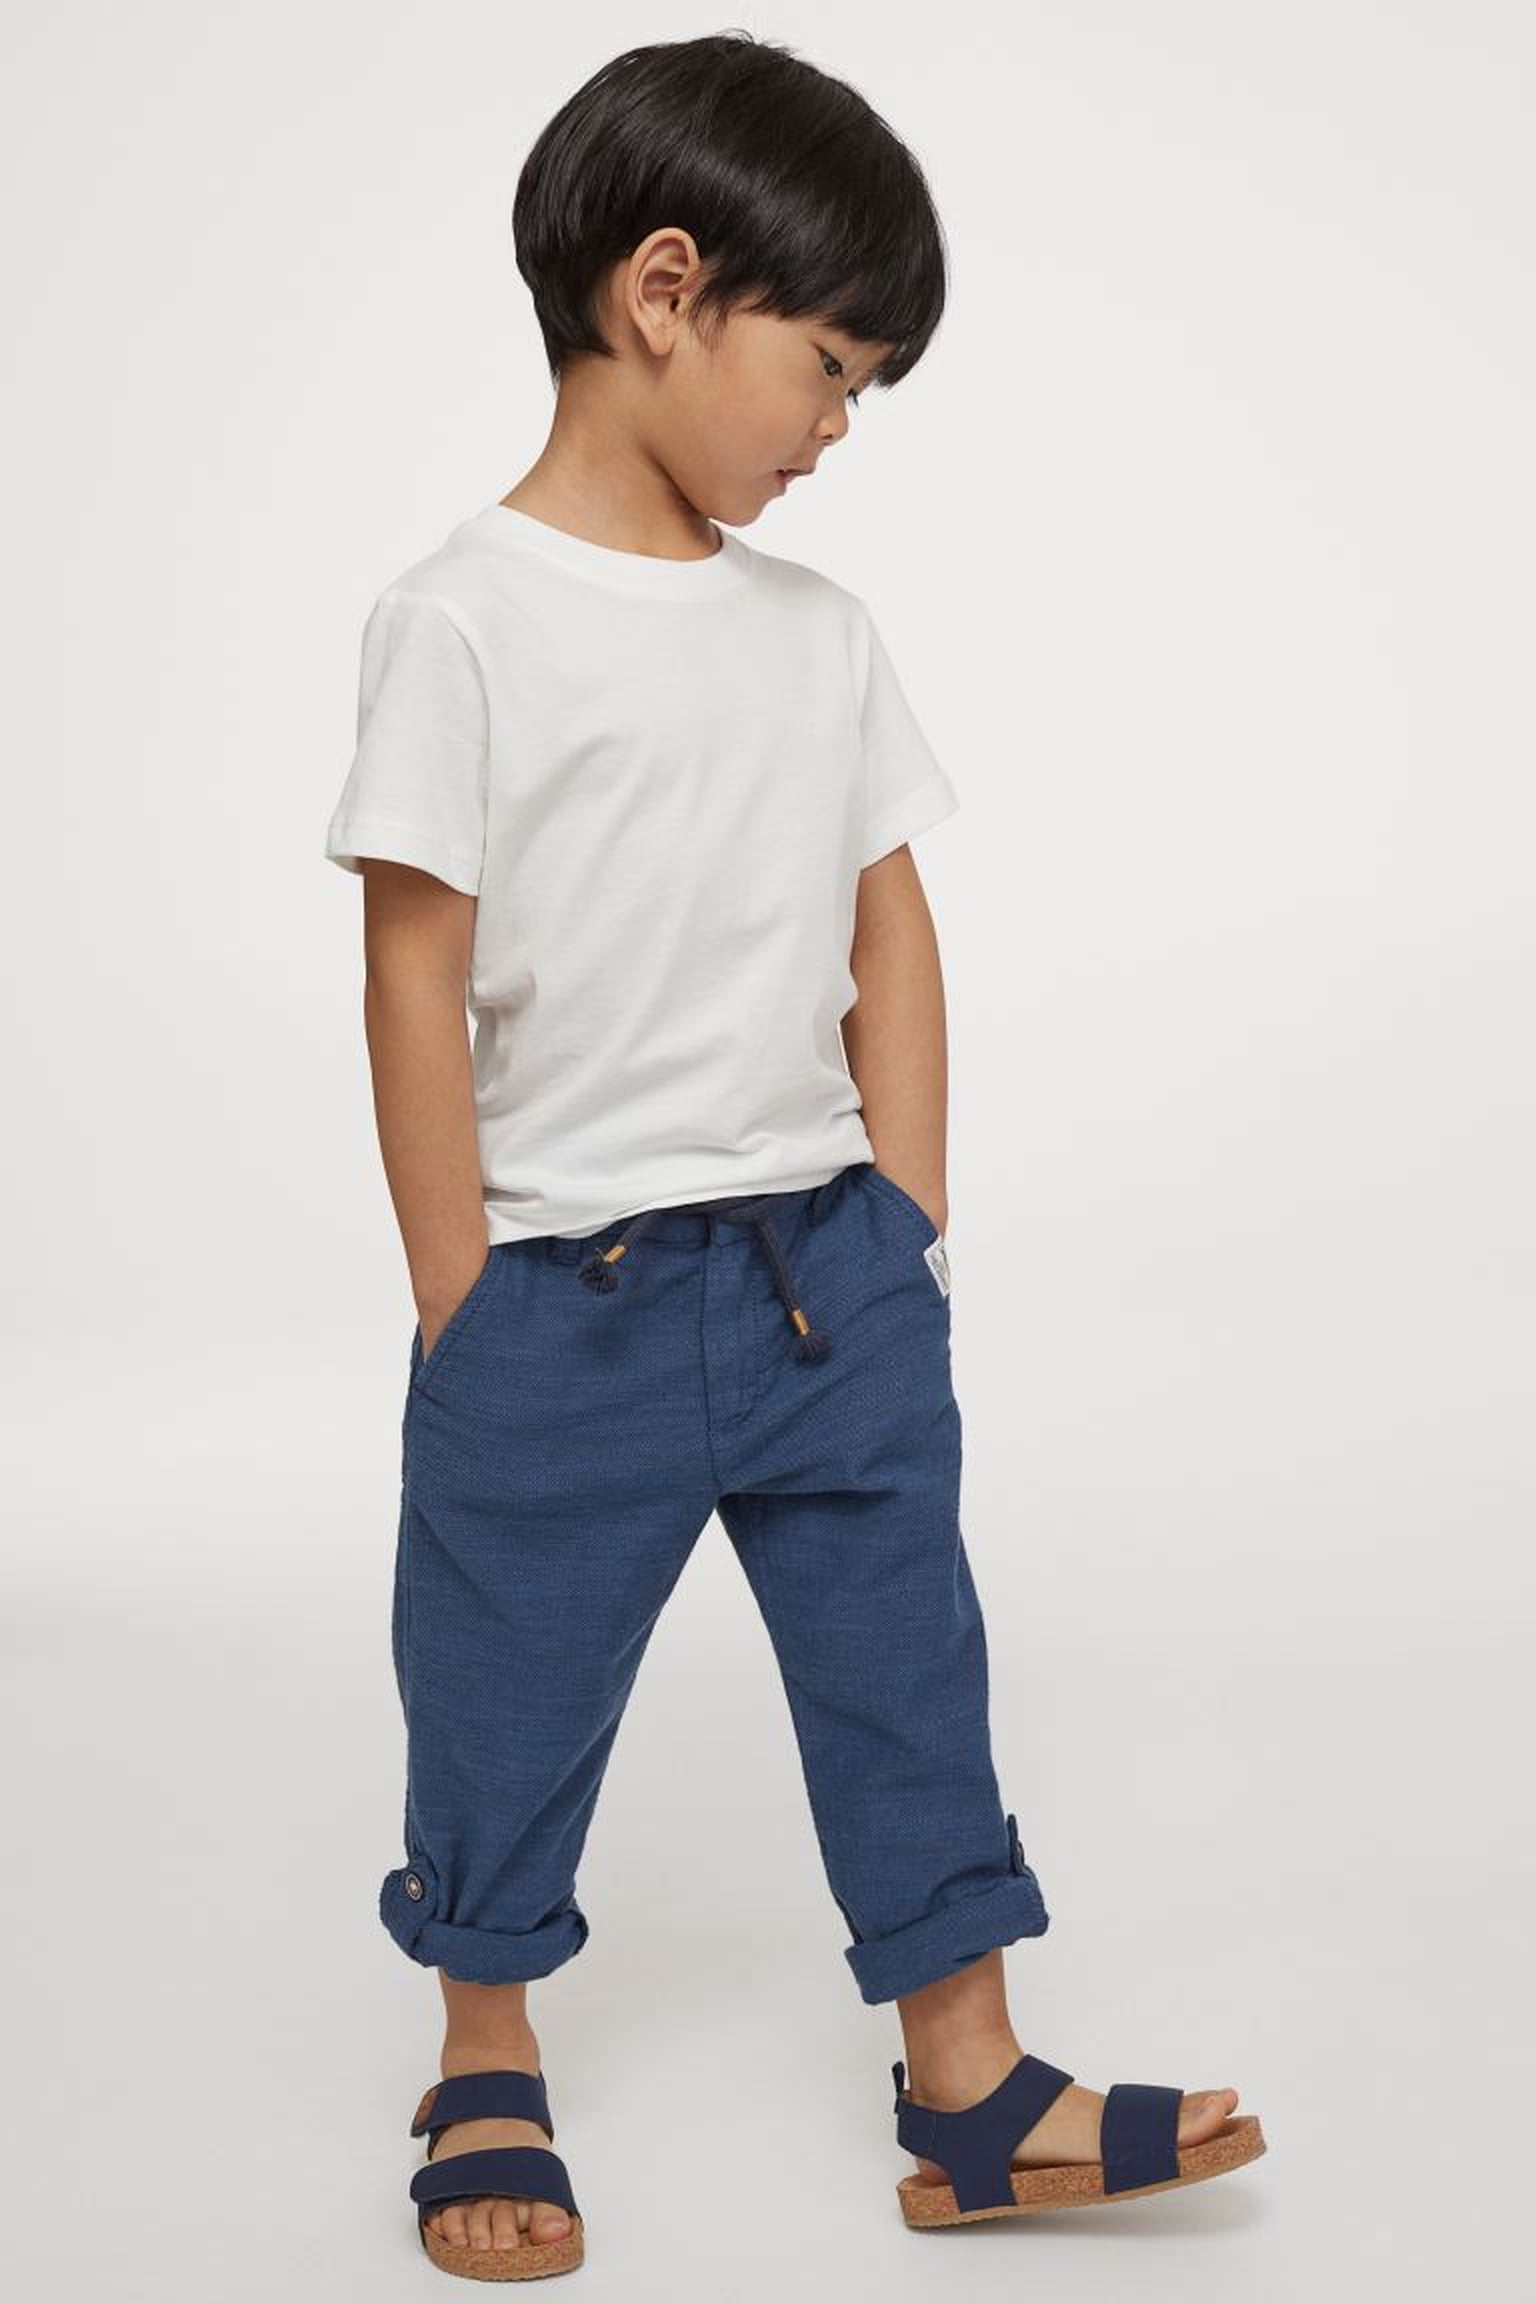 Cute Basic Kids' Clothes From H&M | POPSUGAR Family